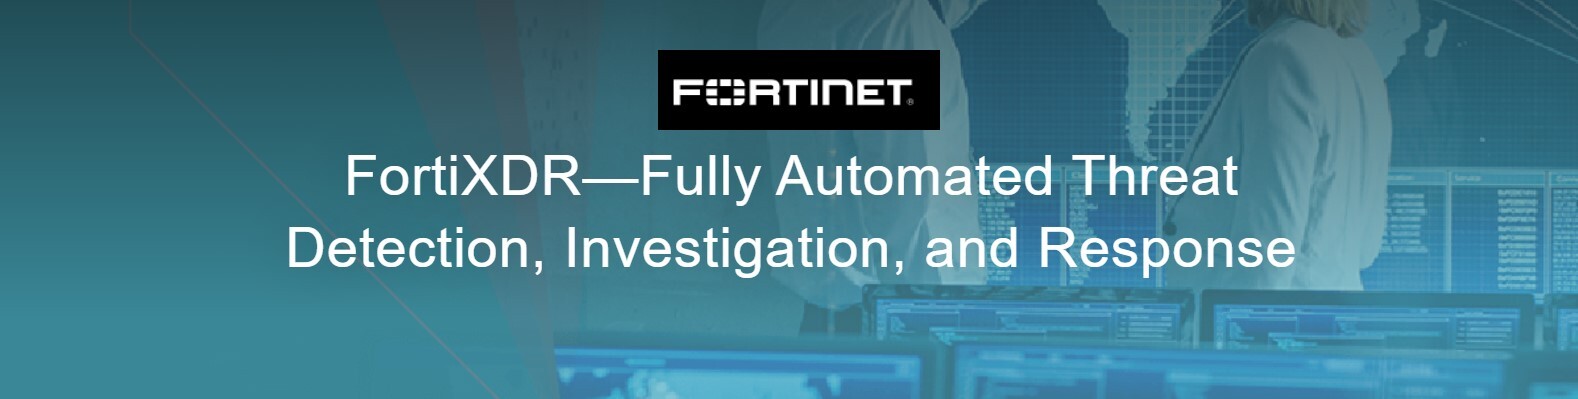 Fortinet Announces AI-powered XDR for Fully Automated Threat Detection, Investigation, and Response